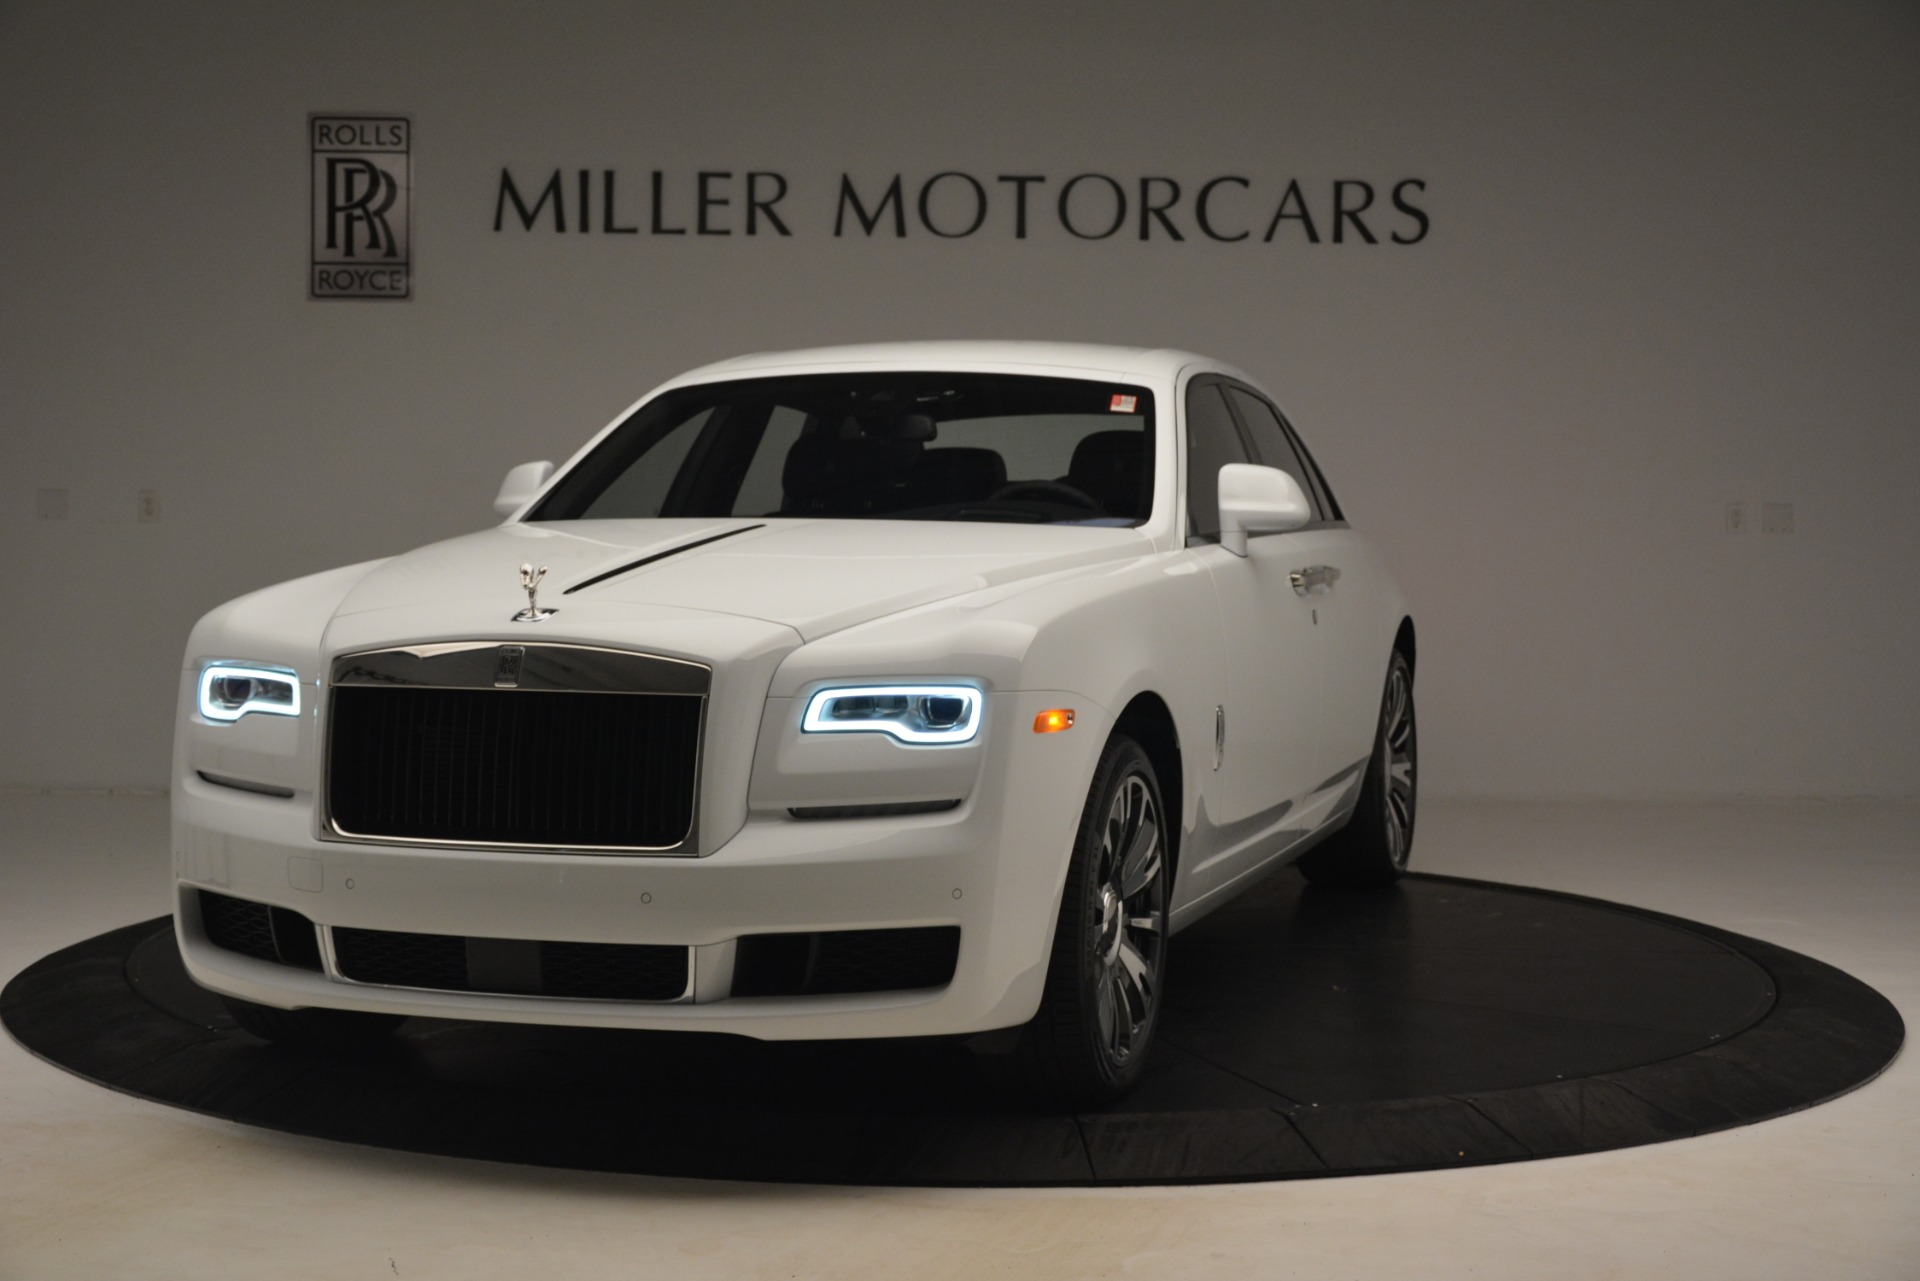 New 2019 Rolls-Royce Ghost for sale Sold at Rolls-Royce Motor Cars Greenwich in Greenwich CT 06830 1